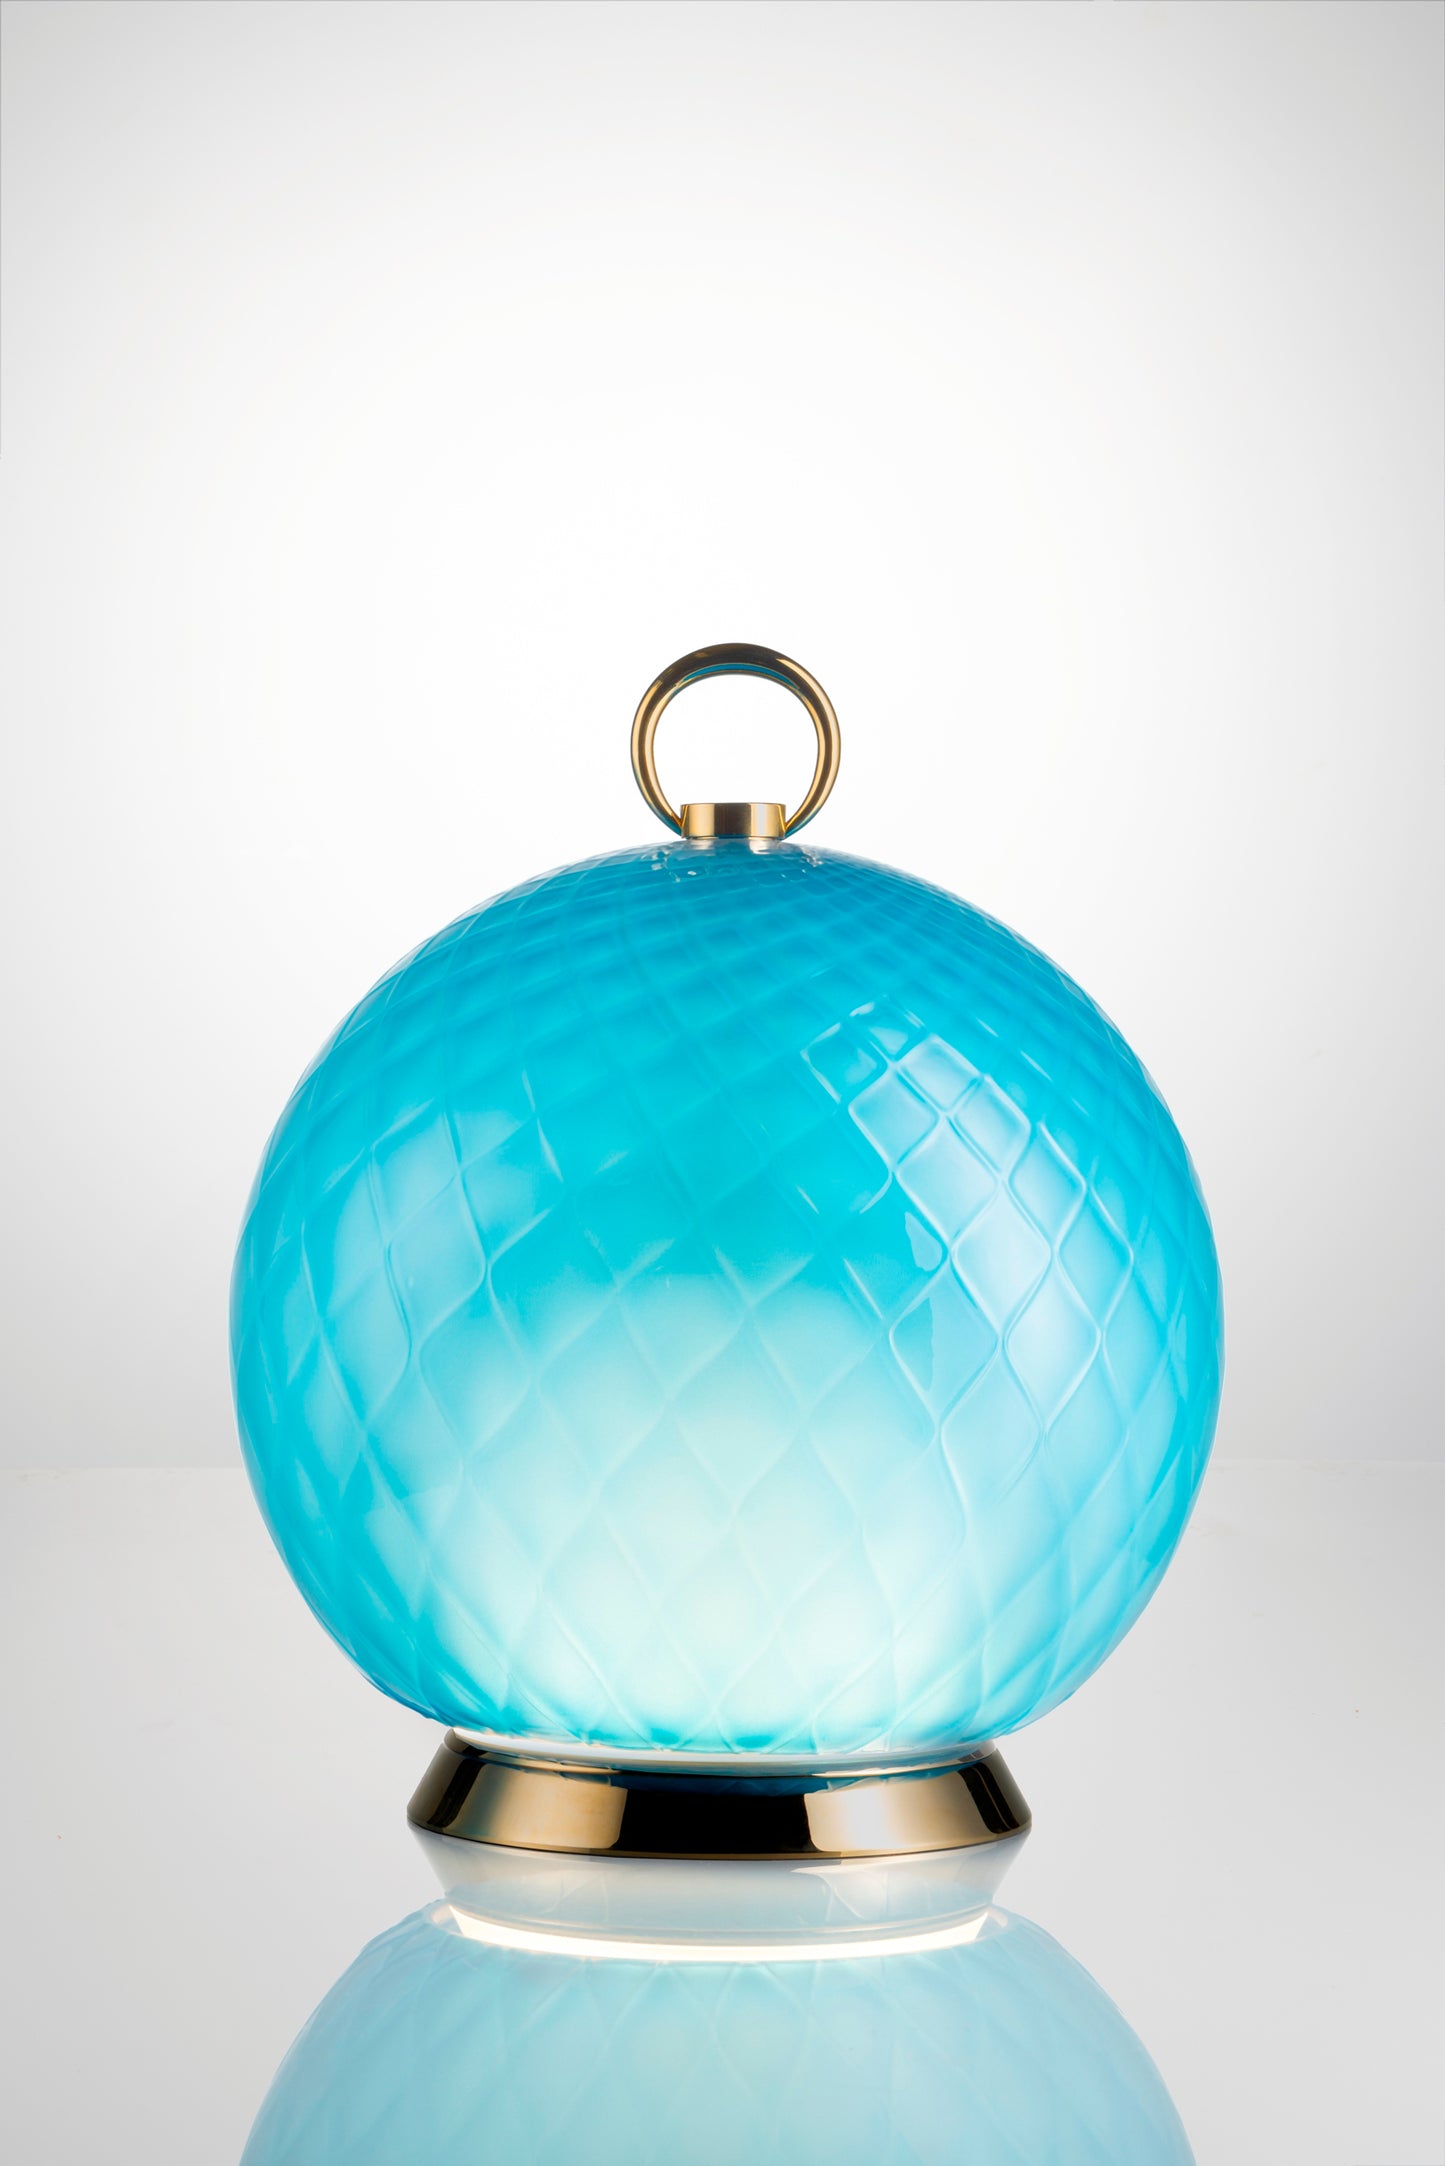 Gran Balloton Luce LED Lamp by Venini | Features distinctive crossed relief effect achieved through the "balloton" technique | Touch/app-dimmable LED technology allows adjustable light intensity | Creates enchanting kaleidoscopic effects with glass | Transforms surroundings into a dance of colors and reflections | Ideal for creating the perfect atmosphere for any occasion | Home Decor Lighting | 2Jour Concierge, your luxury lifestyle shop